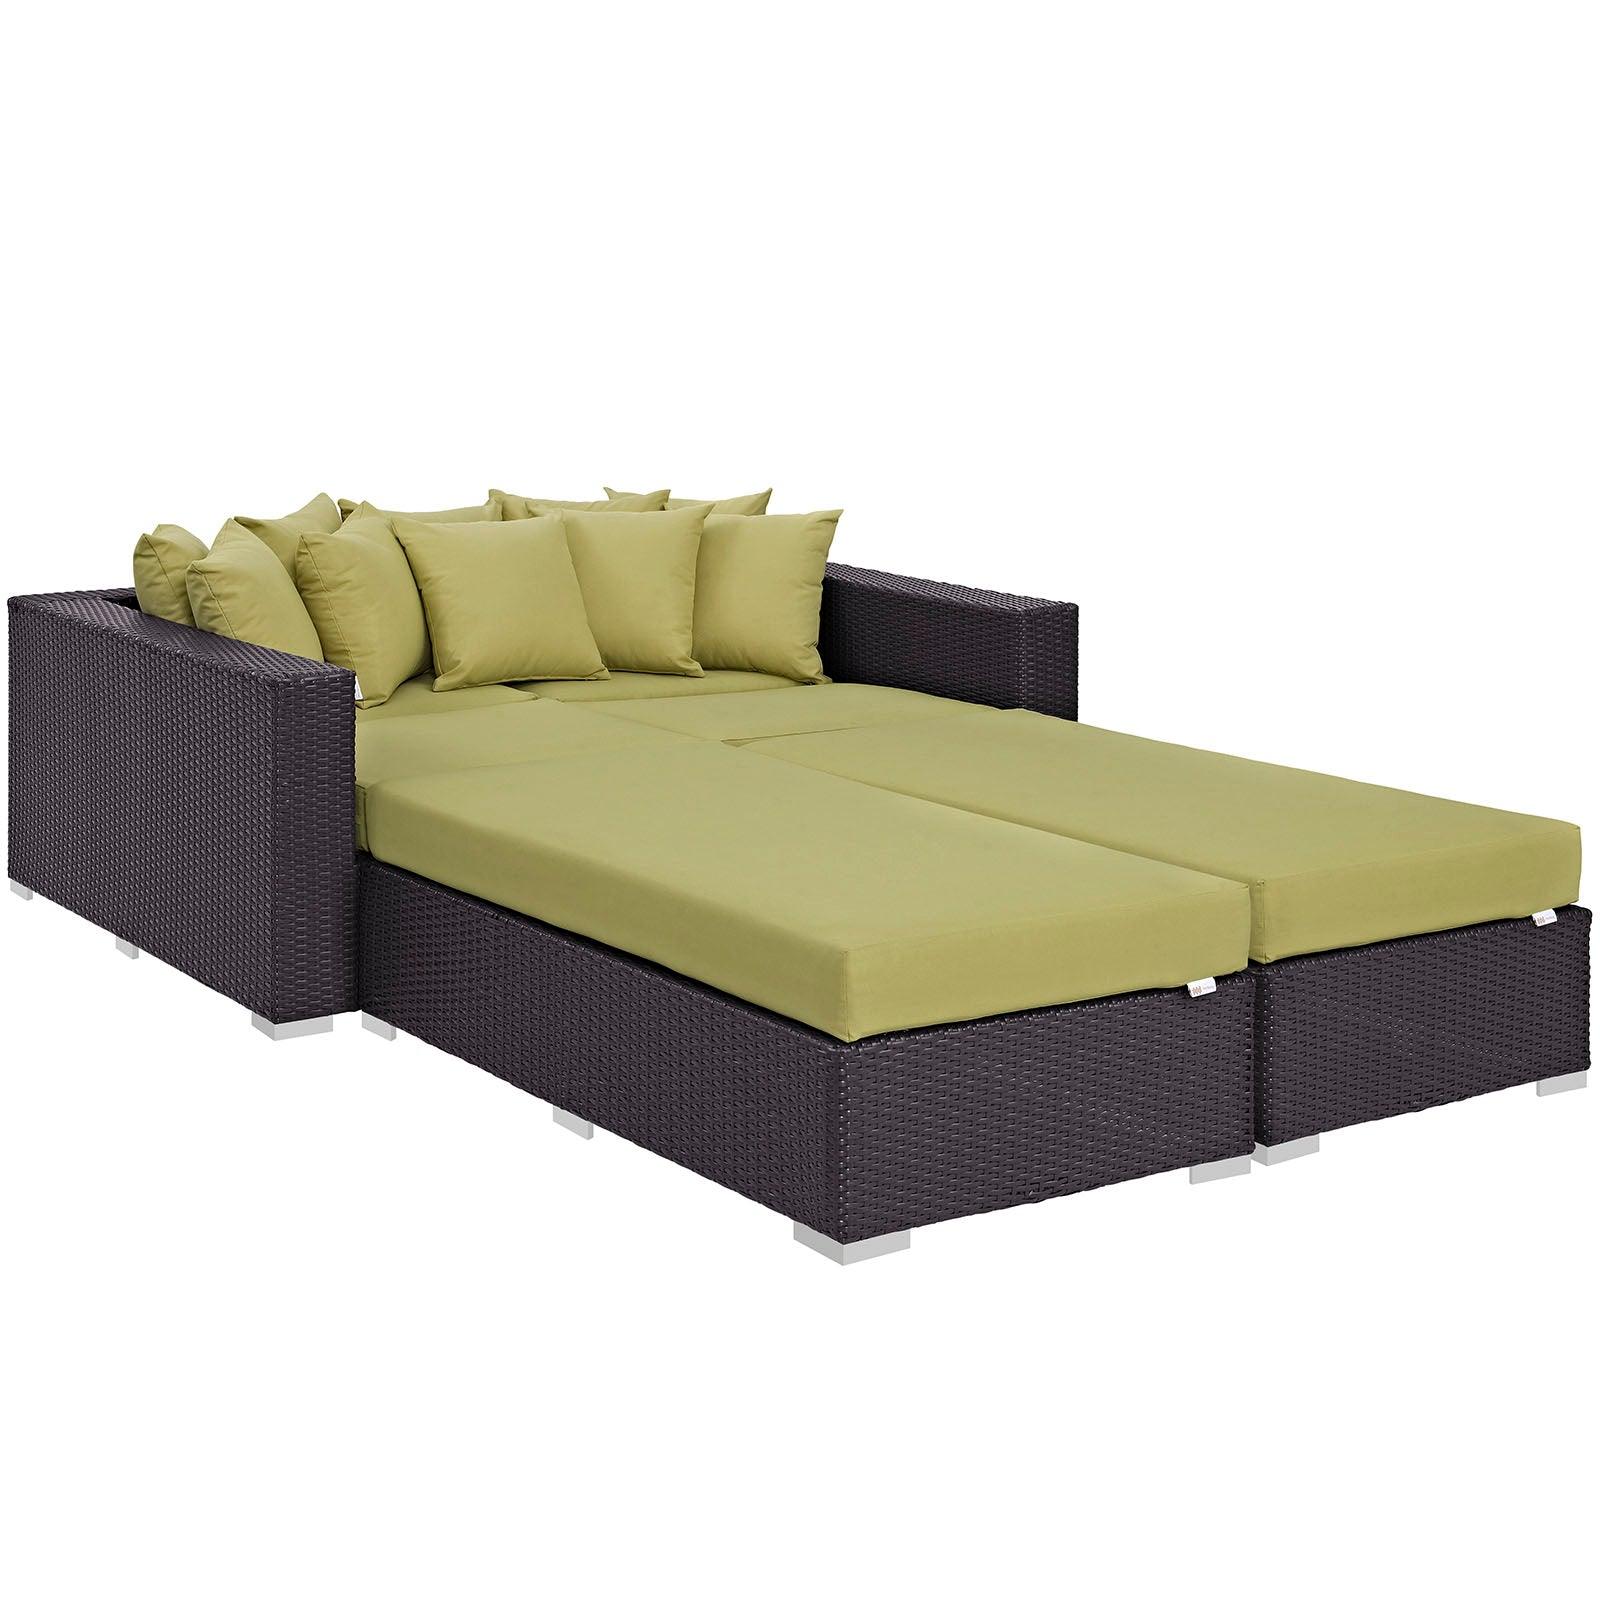 Modway Convene 4 Piece Outdoor Patio Daybed FredCo